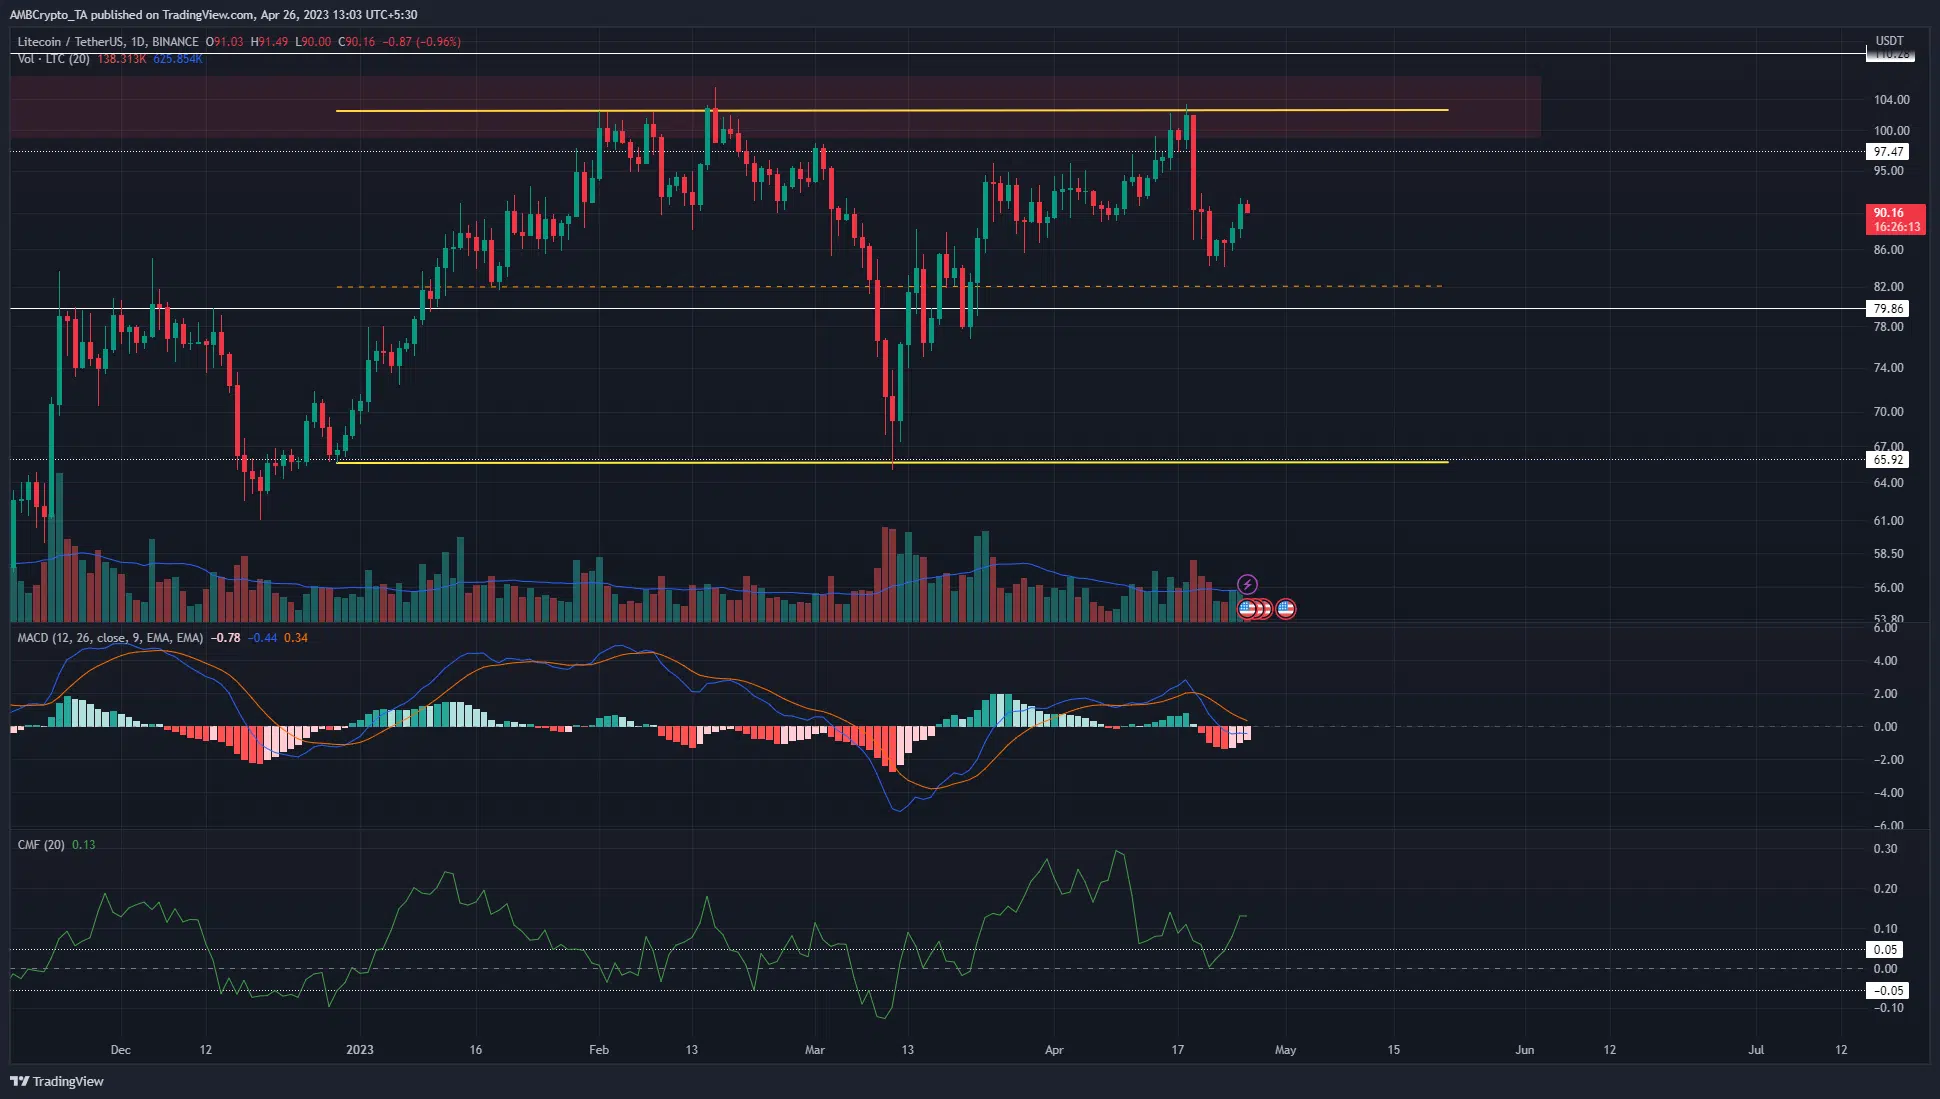 Litecoin rejected from range highs, selling pressure has not eased yet